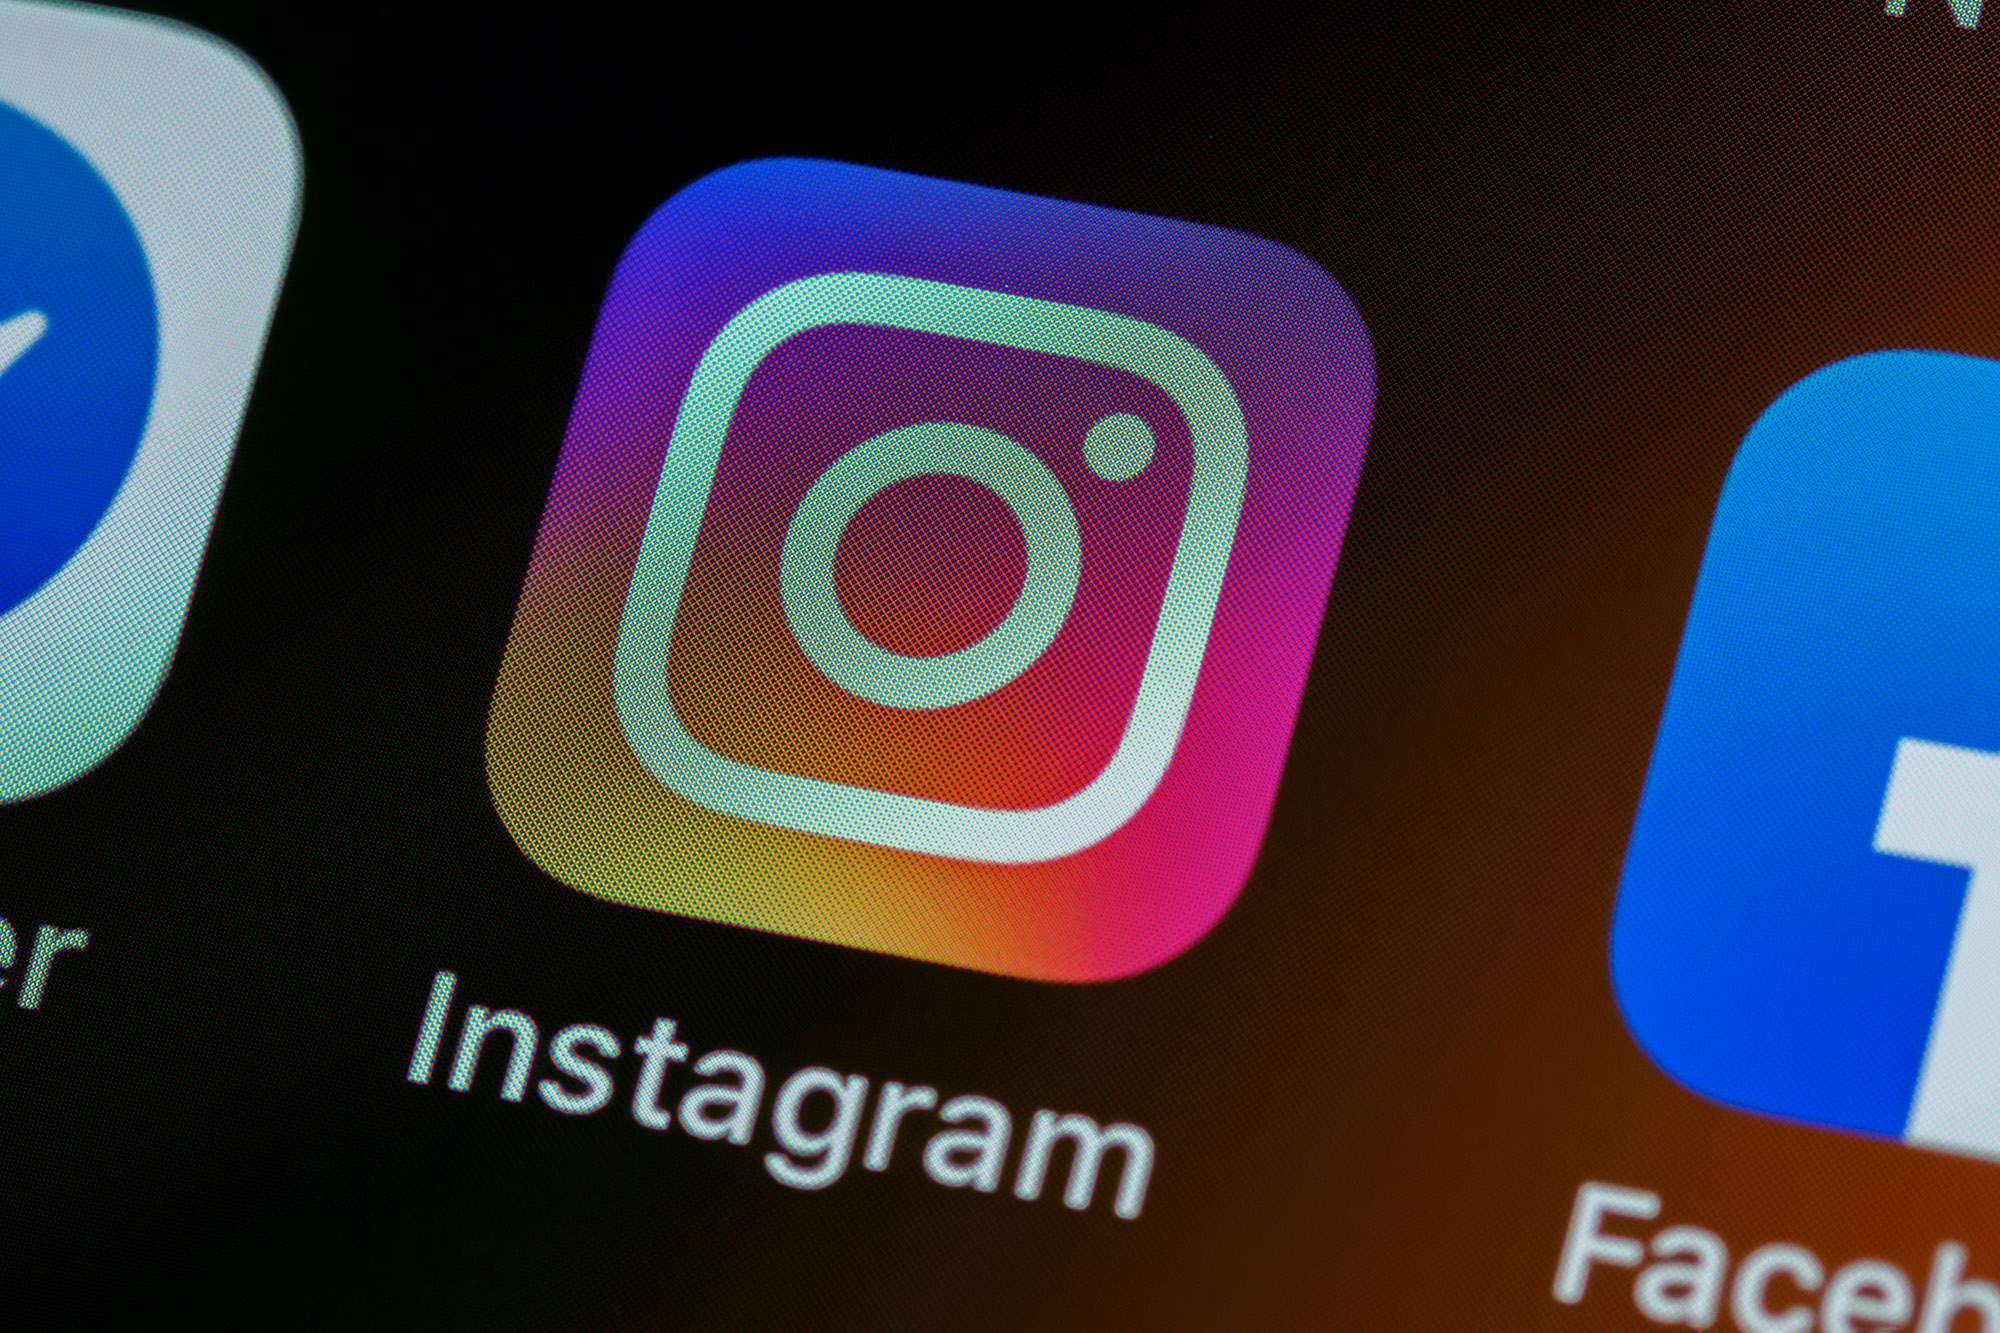 Are your Instagram Stories repeating? You’re not alone